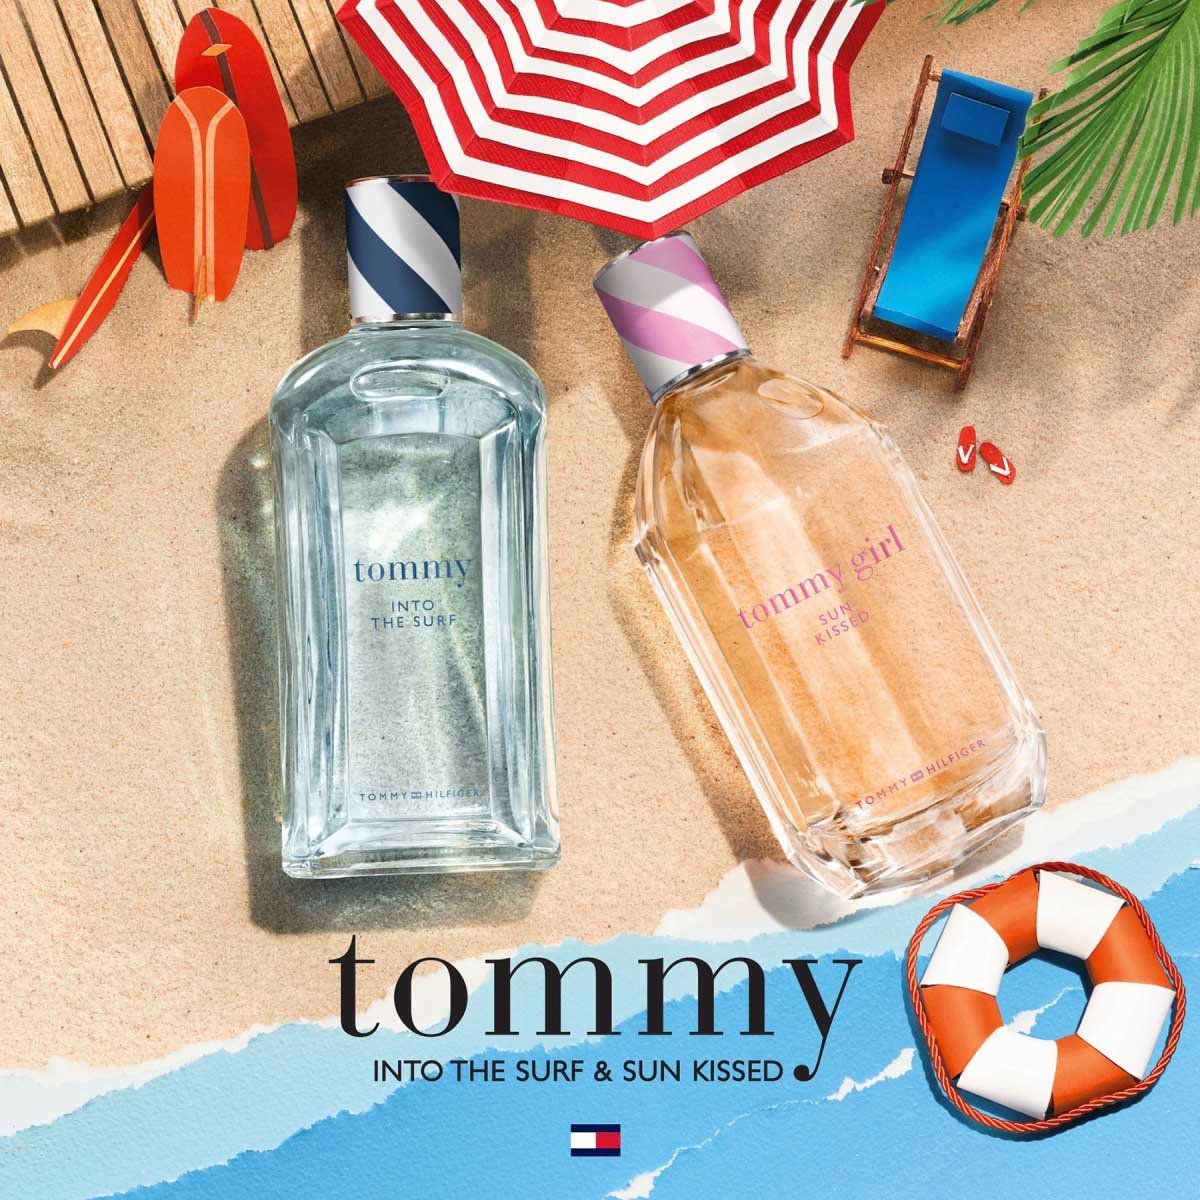 tommy girl sun kissed price